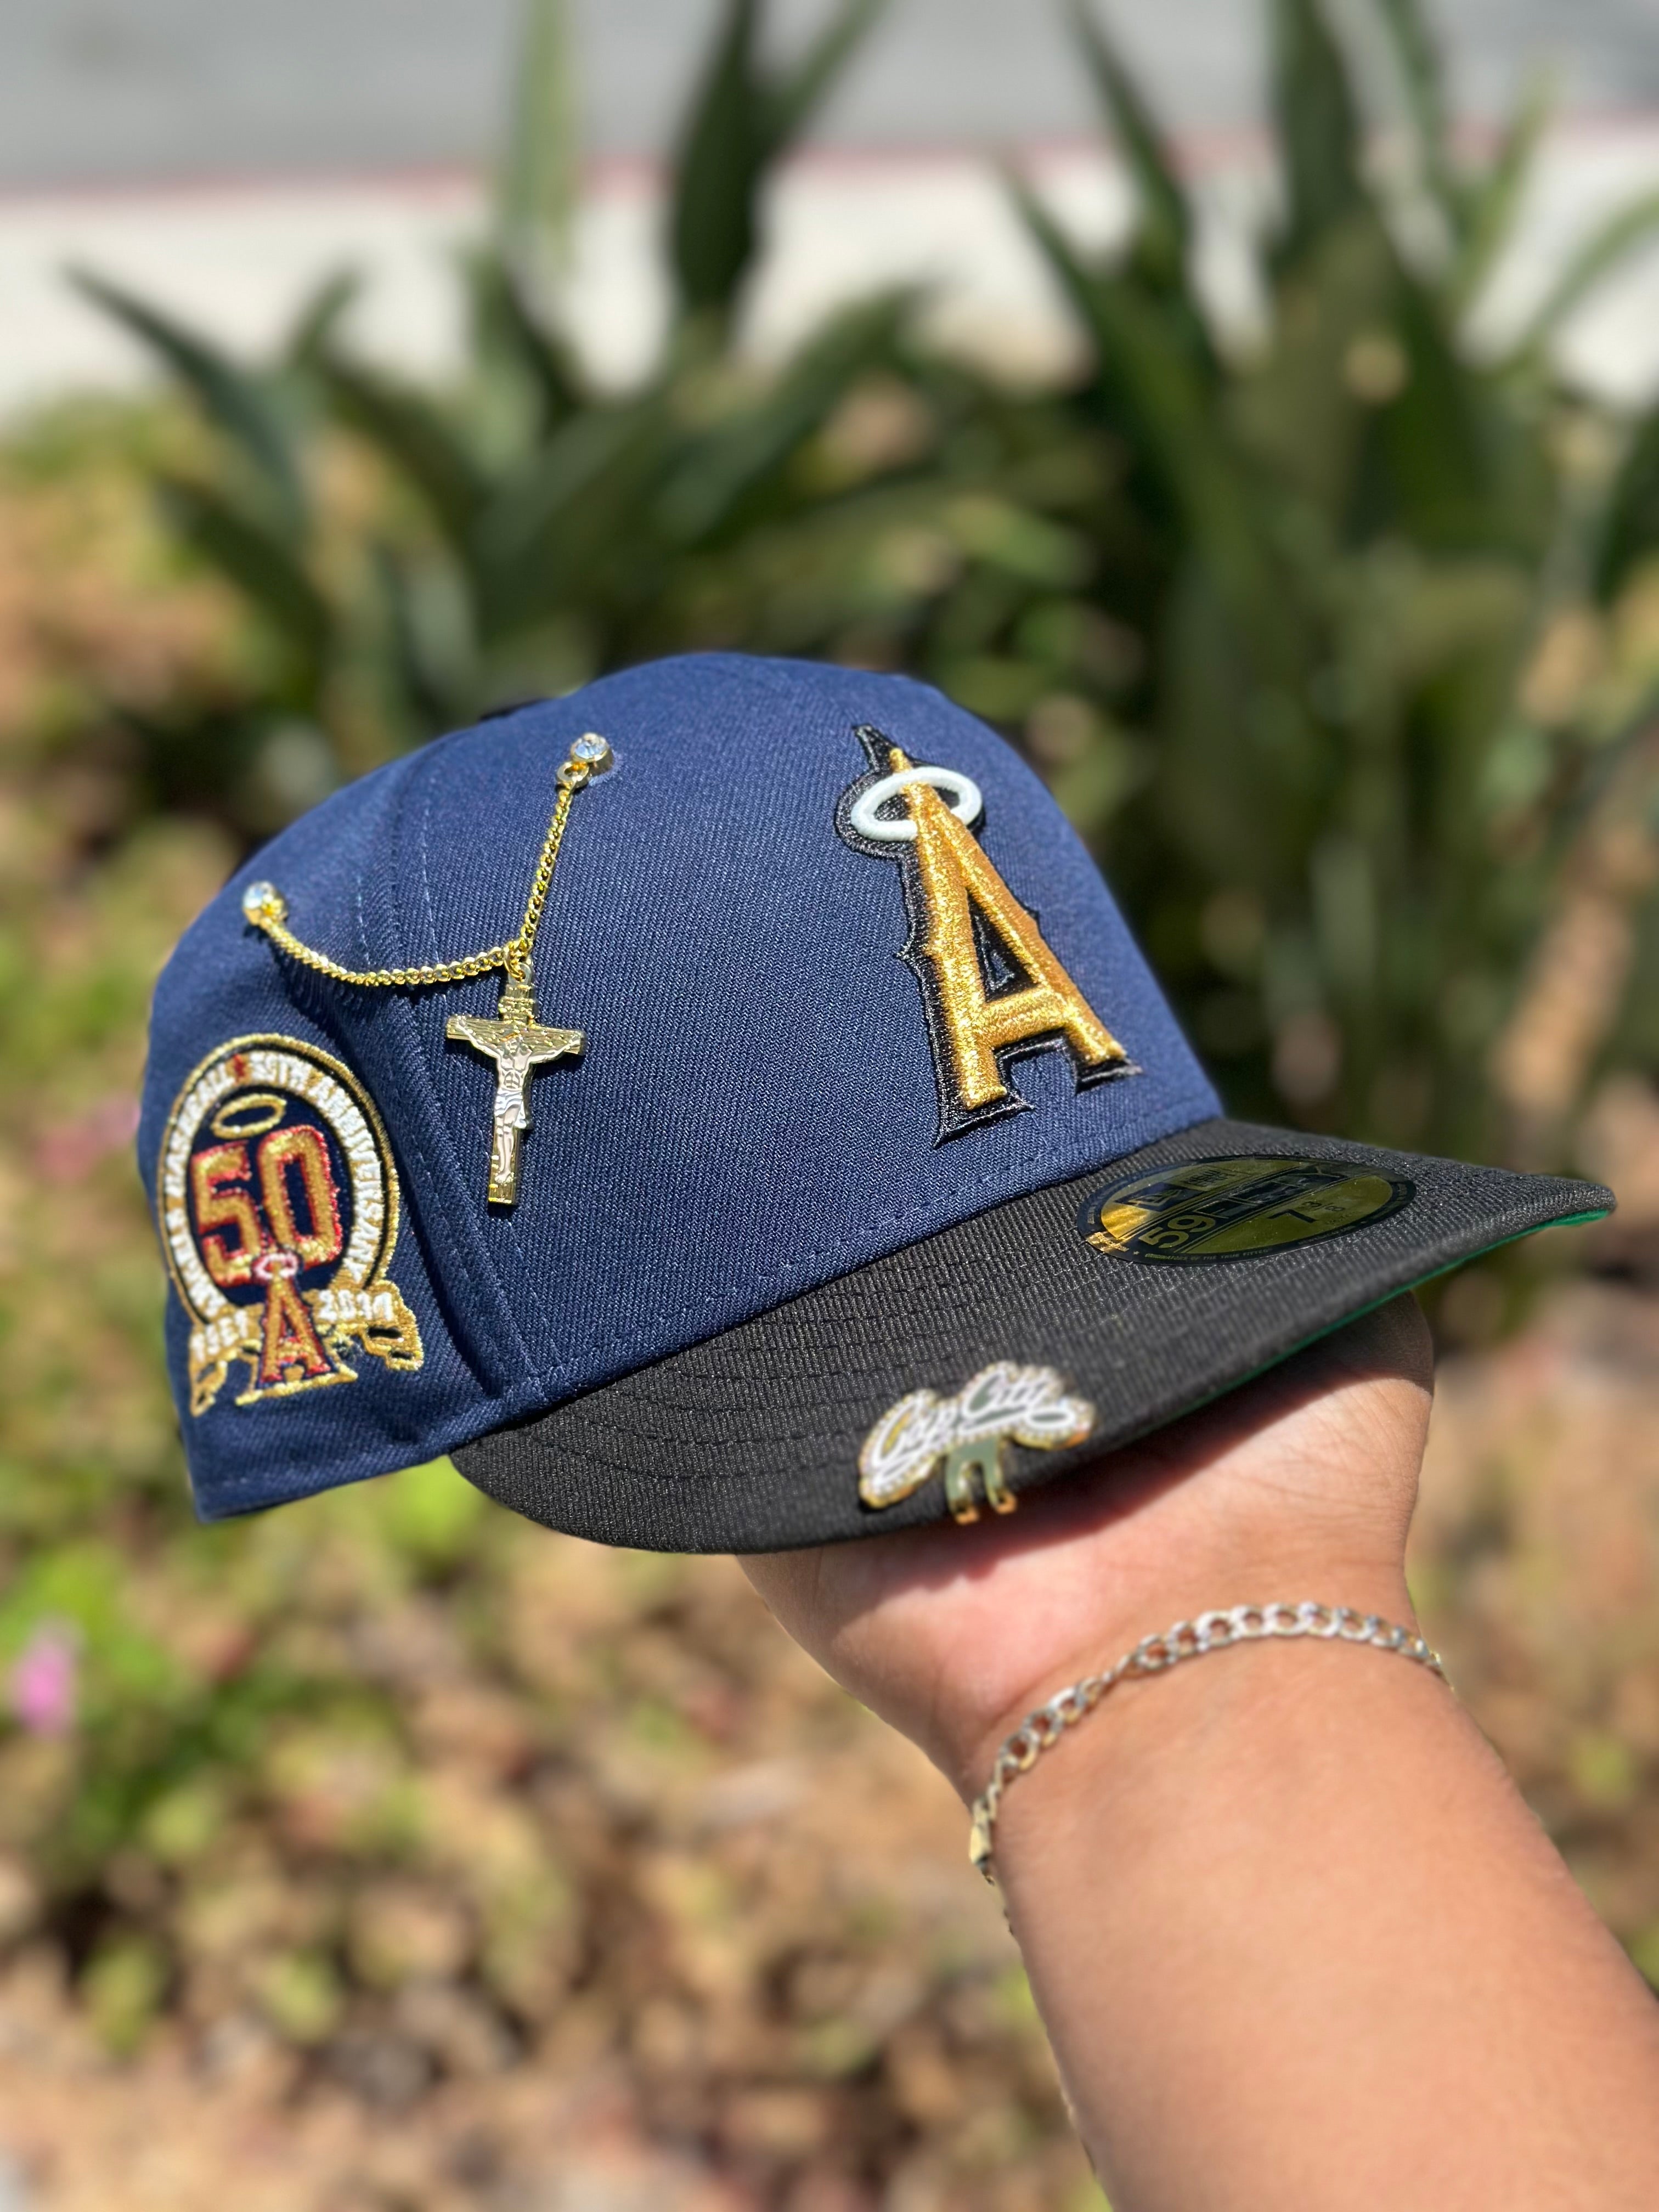 NEW ERA EXCLUSIVE 59FIFTY NAVY/BLACK ANAHEIM ANGELS W/ 50TH ANNIVERSARY SIDE PATCH